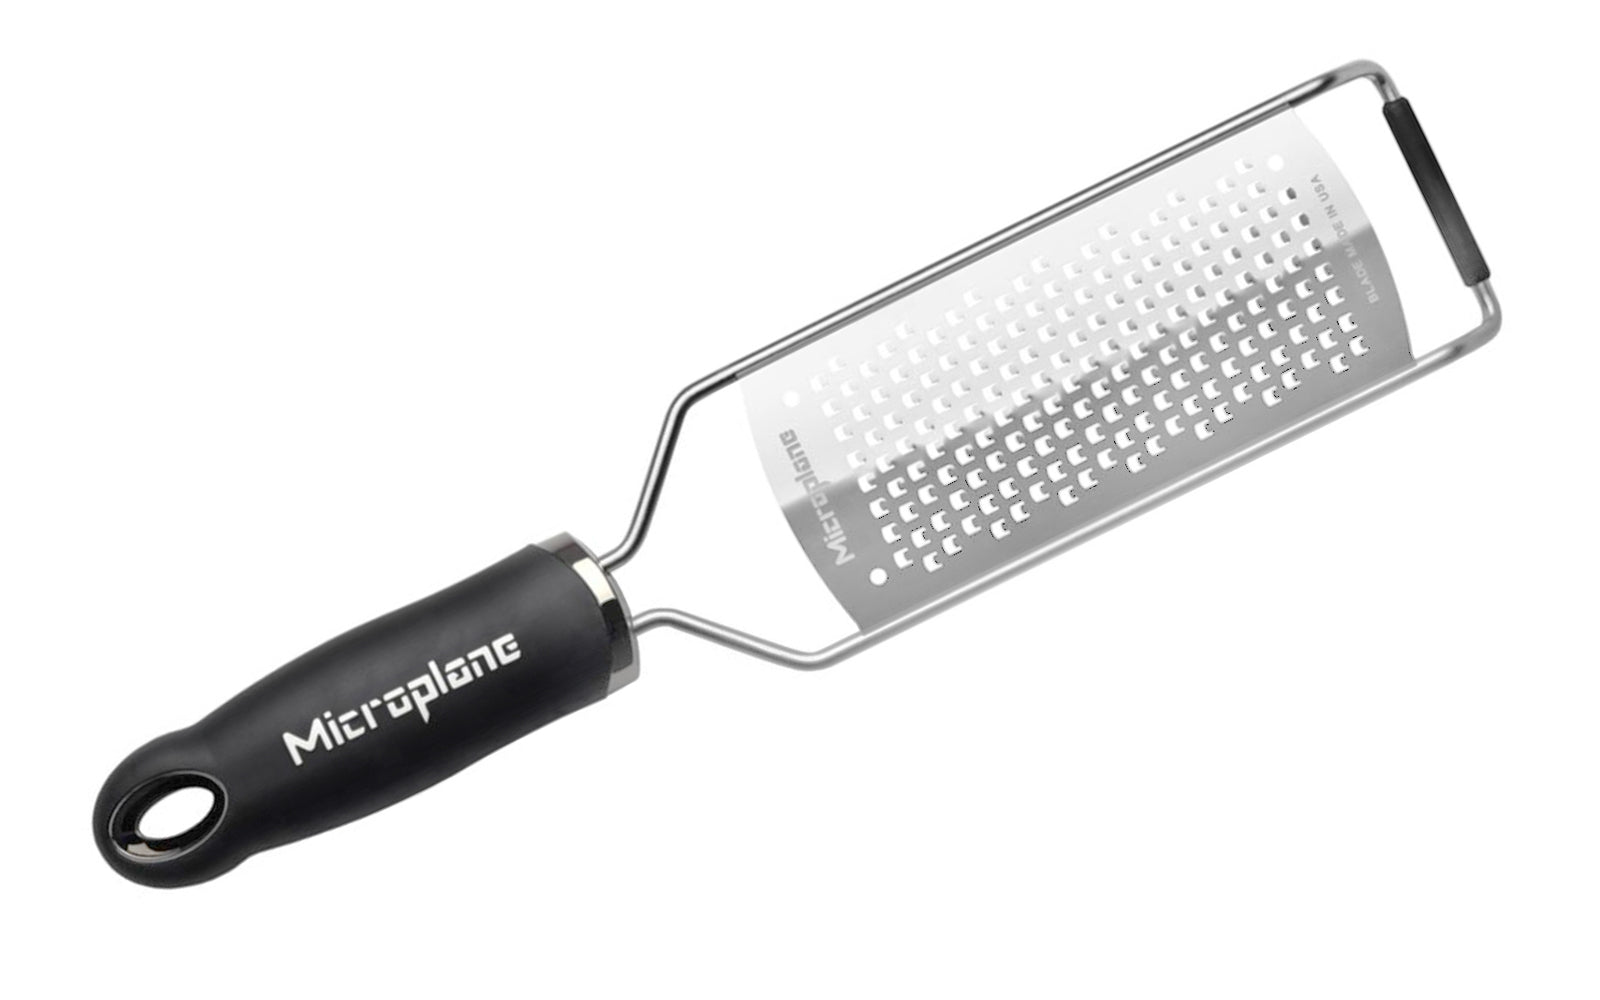 Microplane Professional Series Stainless Steel Grater Attachment - 2 7/8L  x 2 5/8W x 2 3/16H